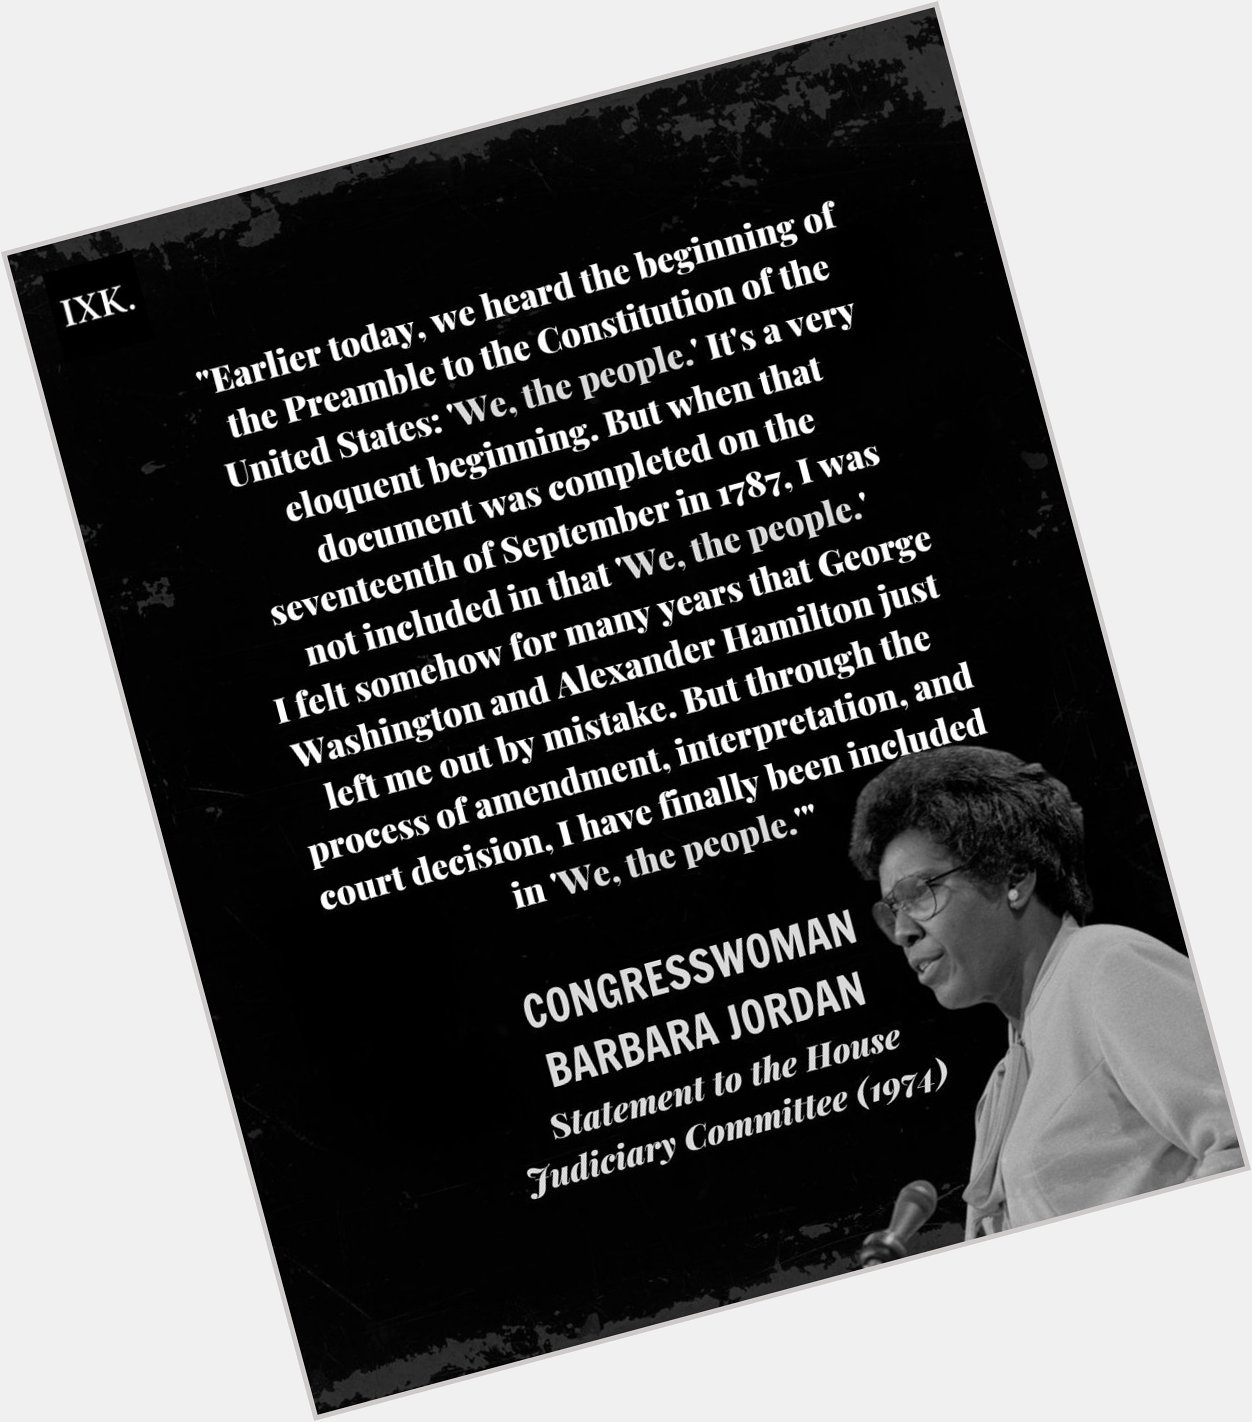 Happy birthday, Barbara Jordan, the first Black woman in Congress from the Deep South. 